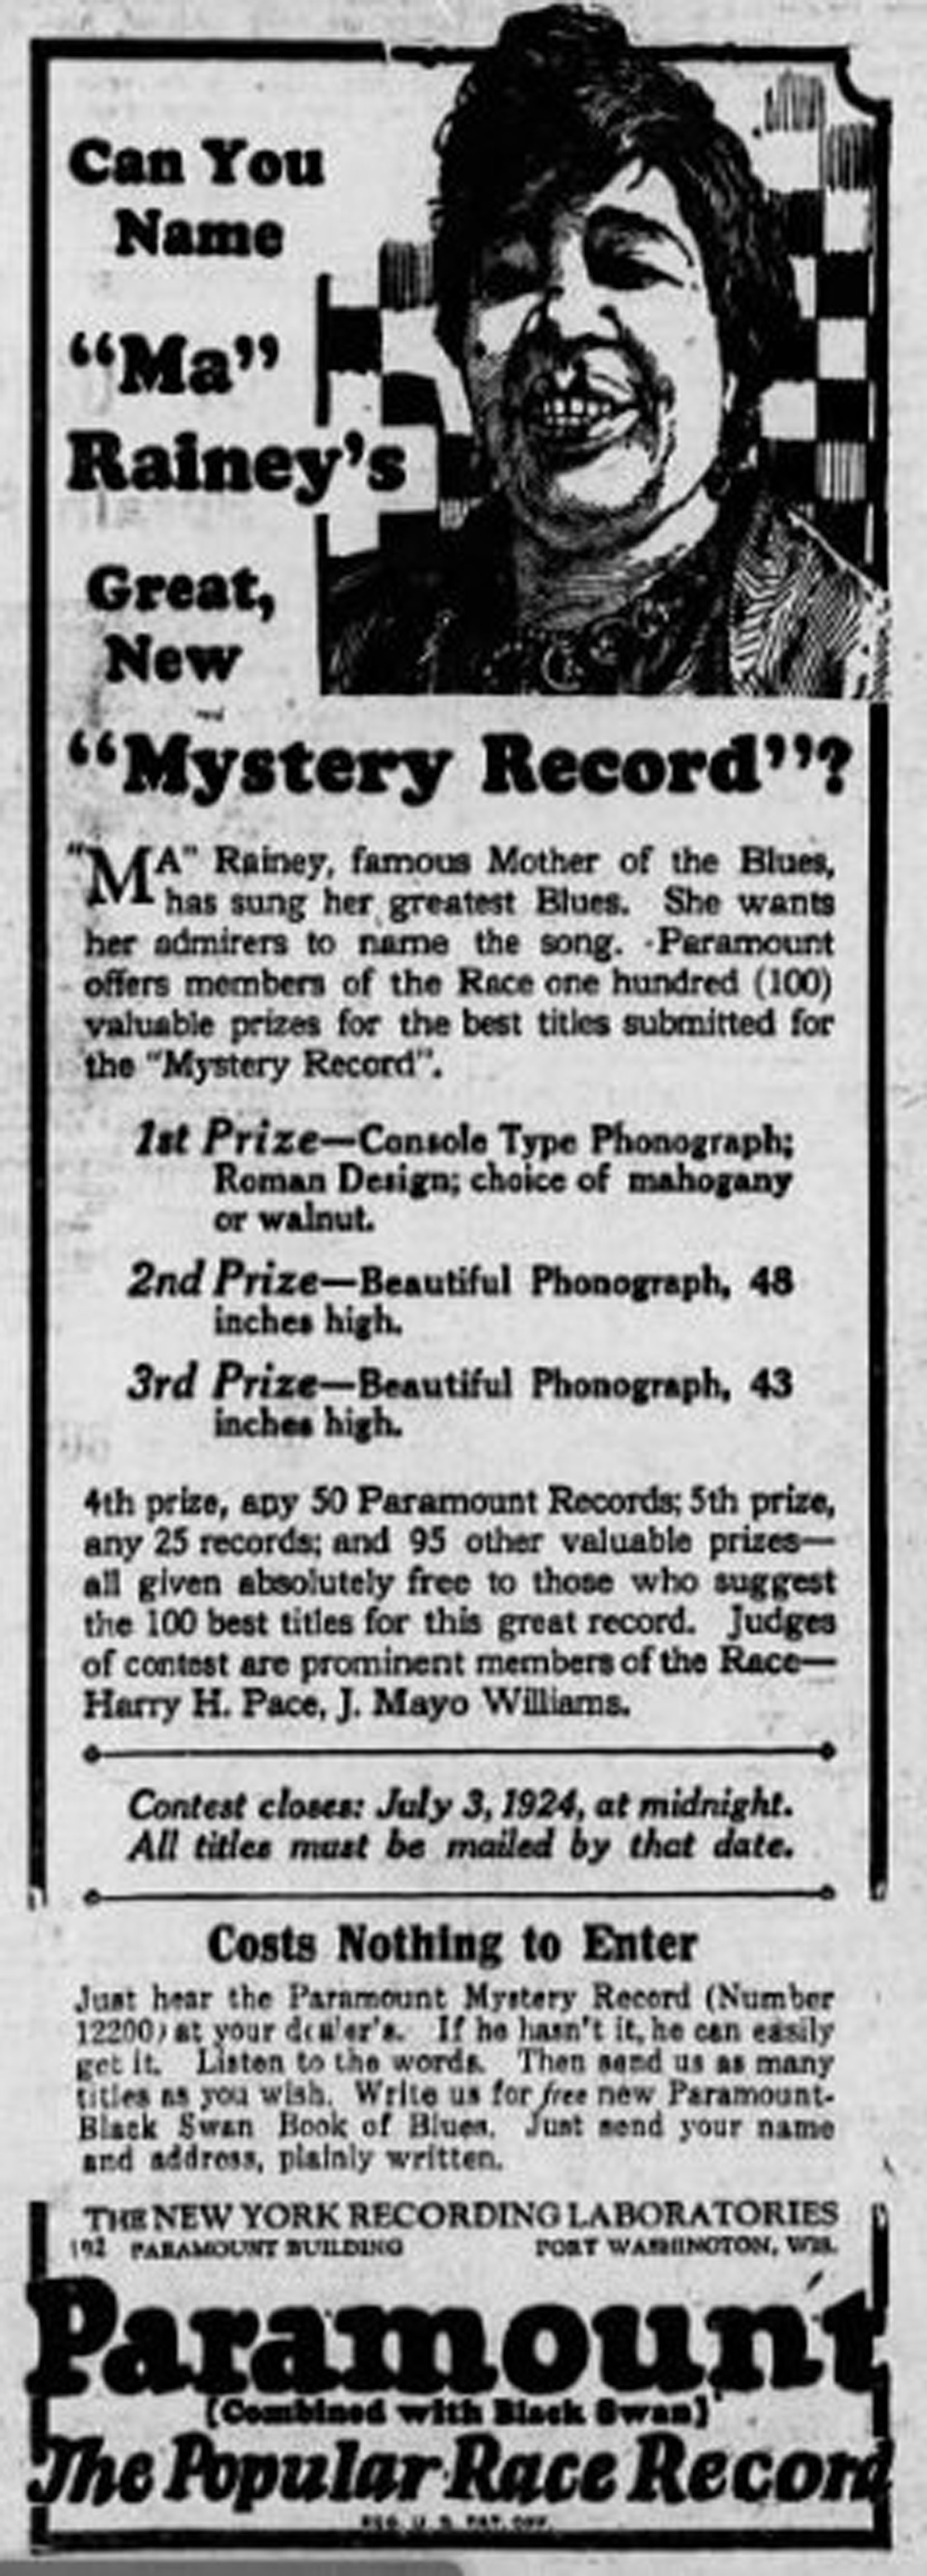 A 1924 advertisement for Ma Rainey recordings in the New York Age. (Courtesy of Mt. Zion Memorial Fund)